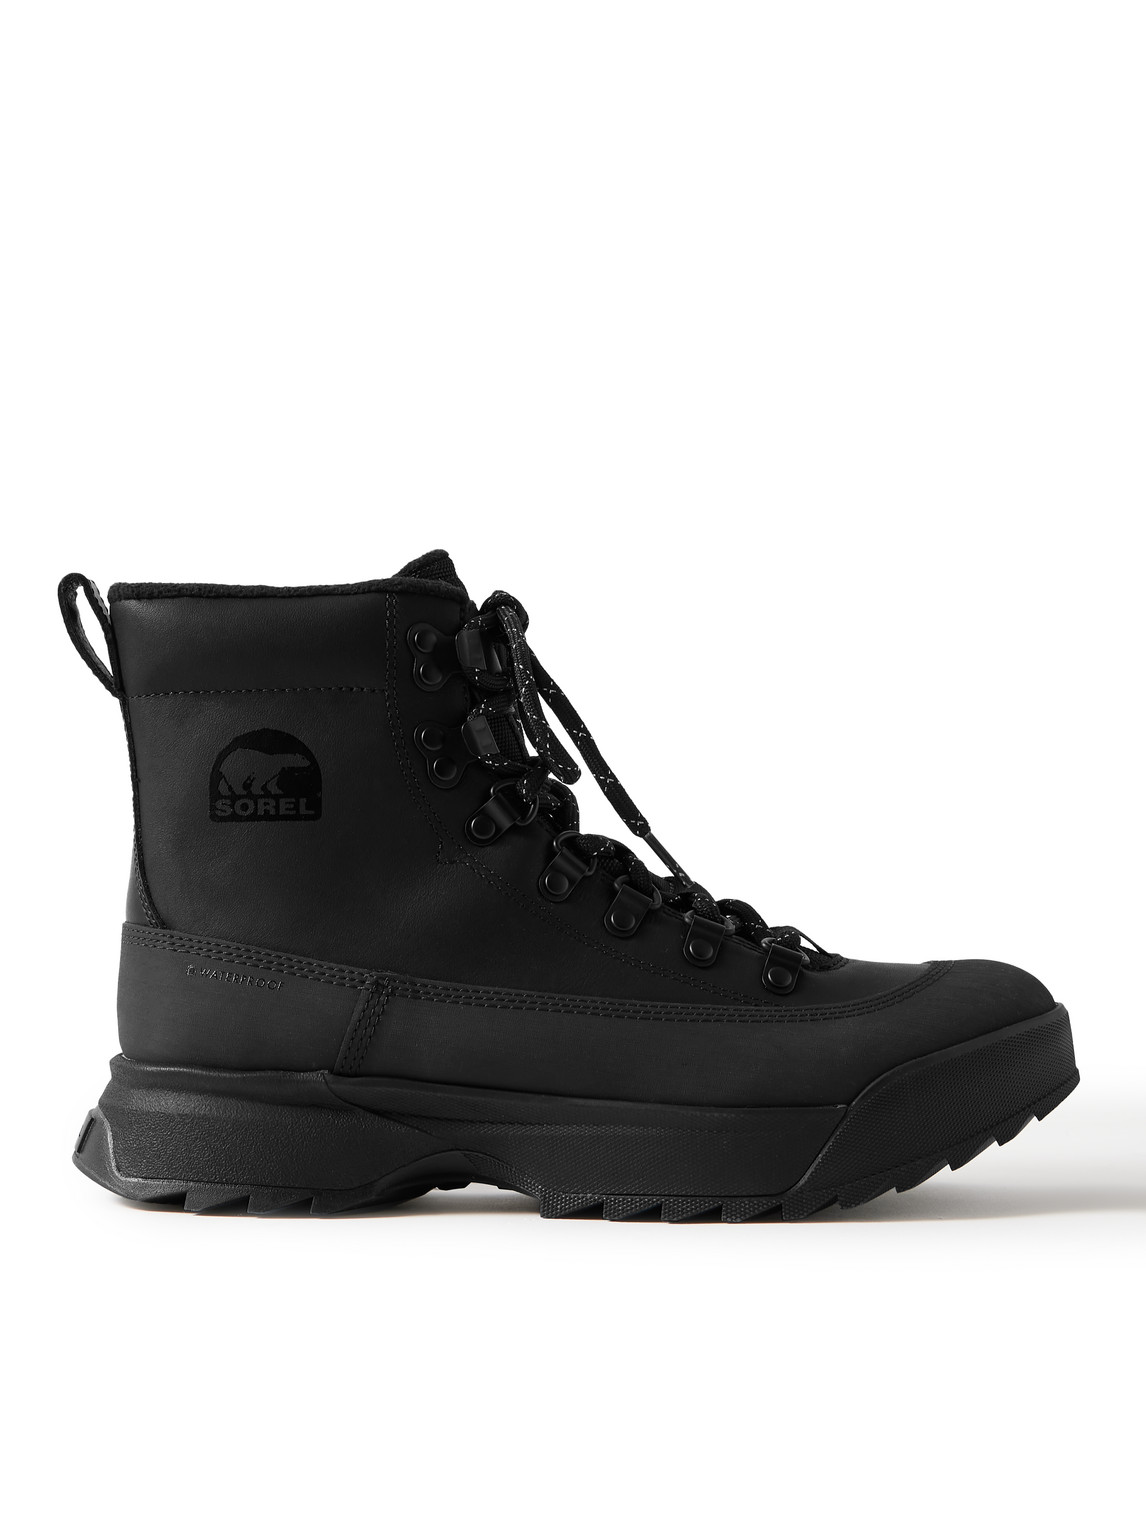 Scout '87™ Pro Fleece-Lined Leather Boots